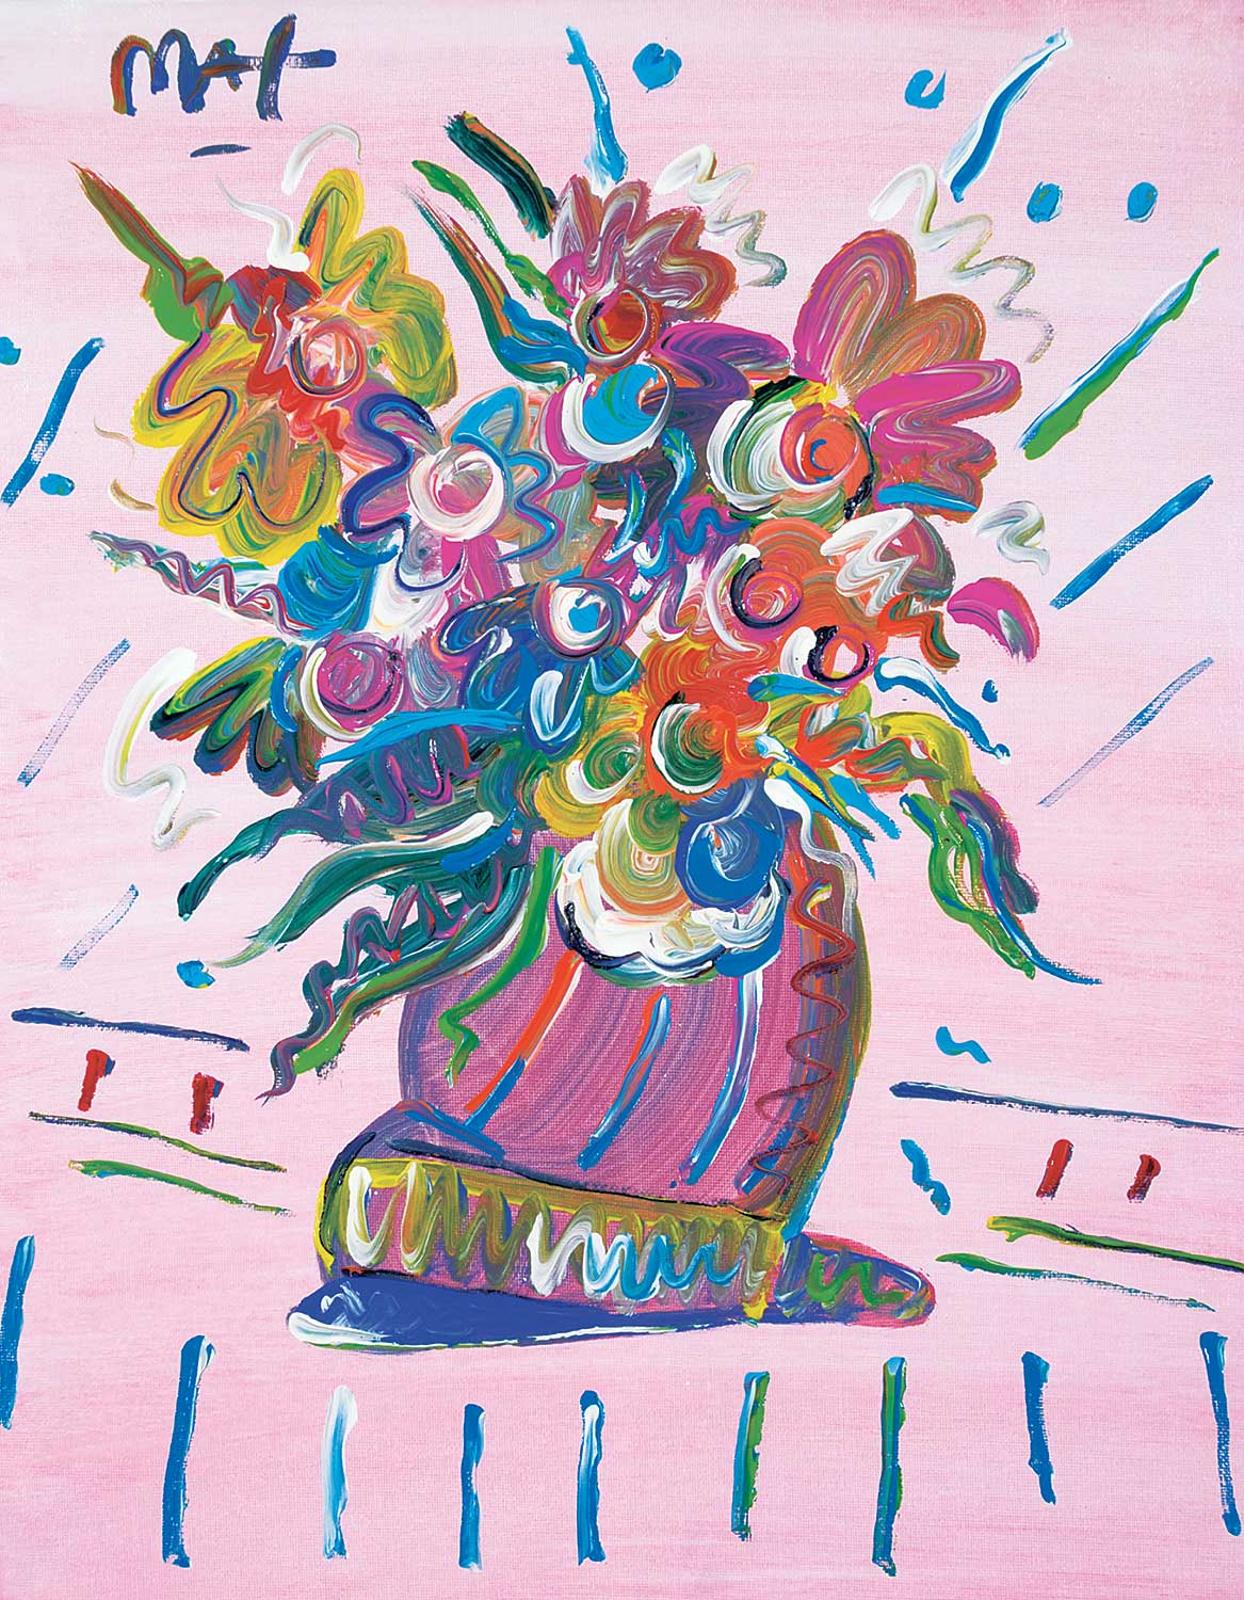 Peter Max (1937) - Untitled - Vase of Flowers on Pink